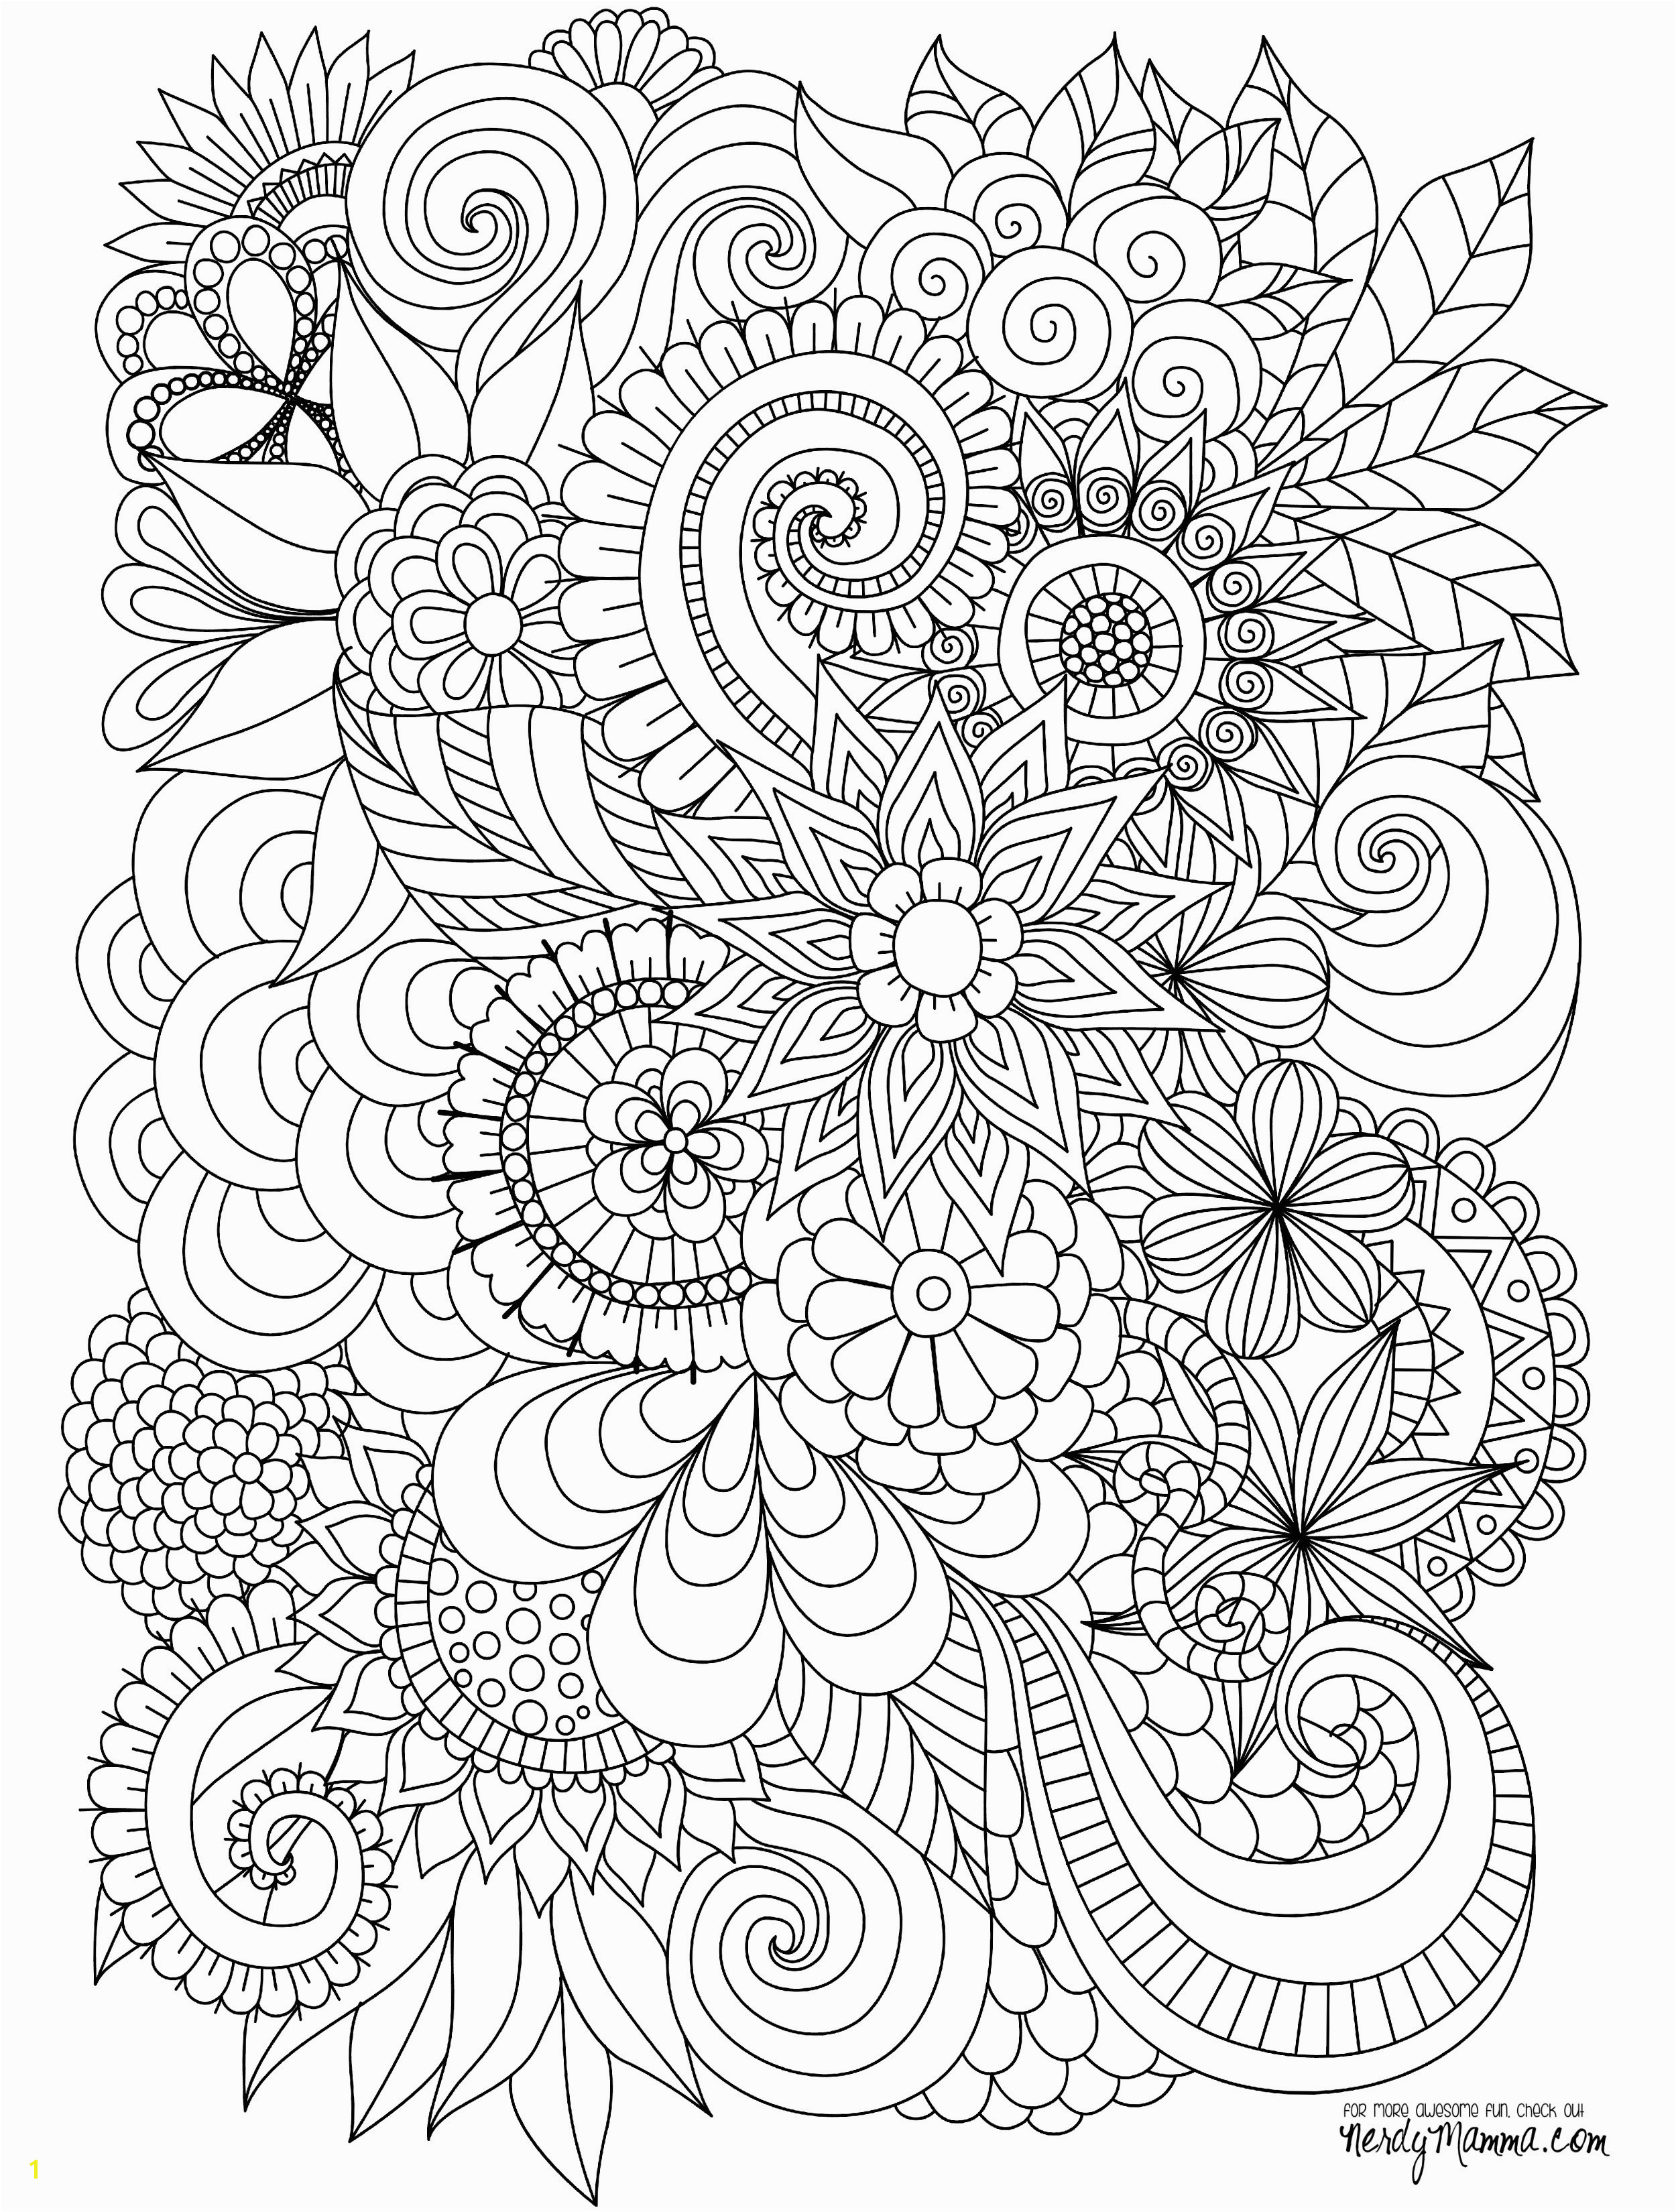 Flower Coloring Pages Printable for Adults 11 Free Printable Adult Coloring Pages